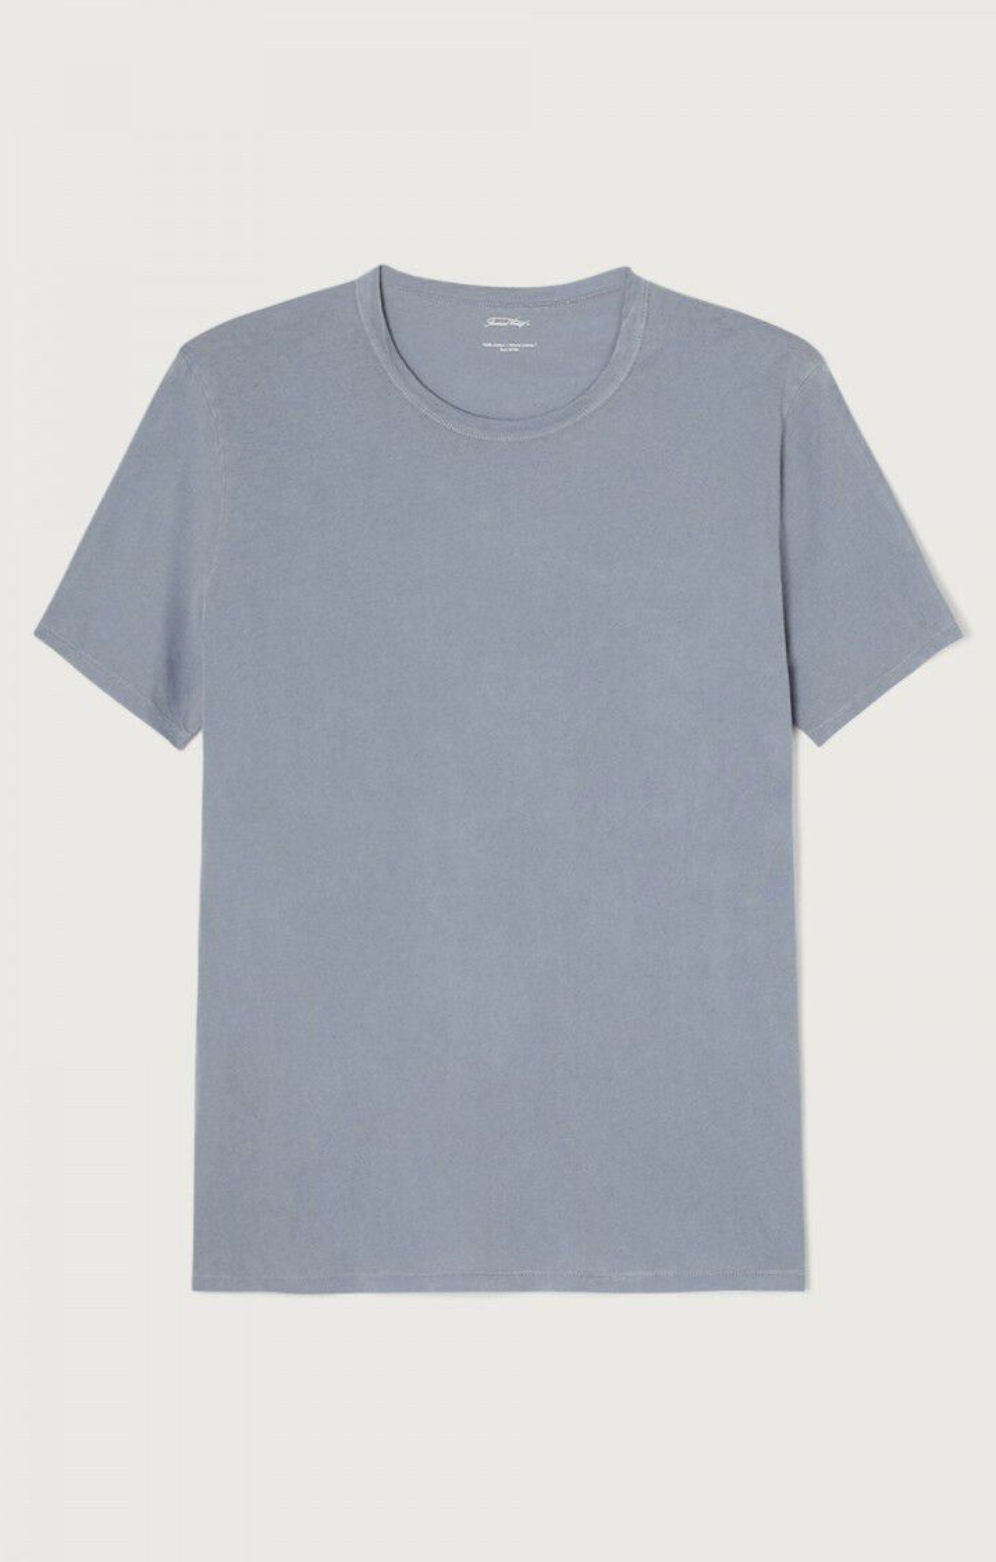 A flat lay image of the devon tee shirt in vintage blube